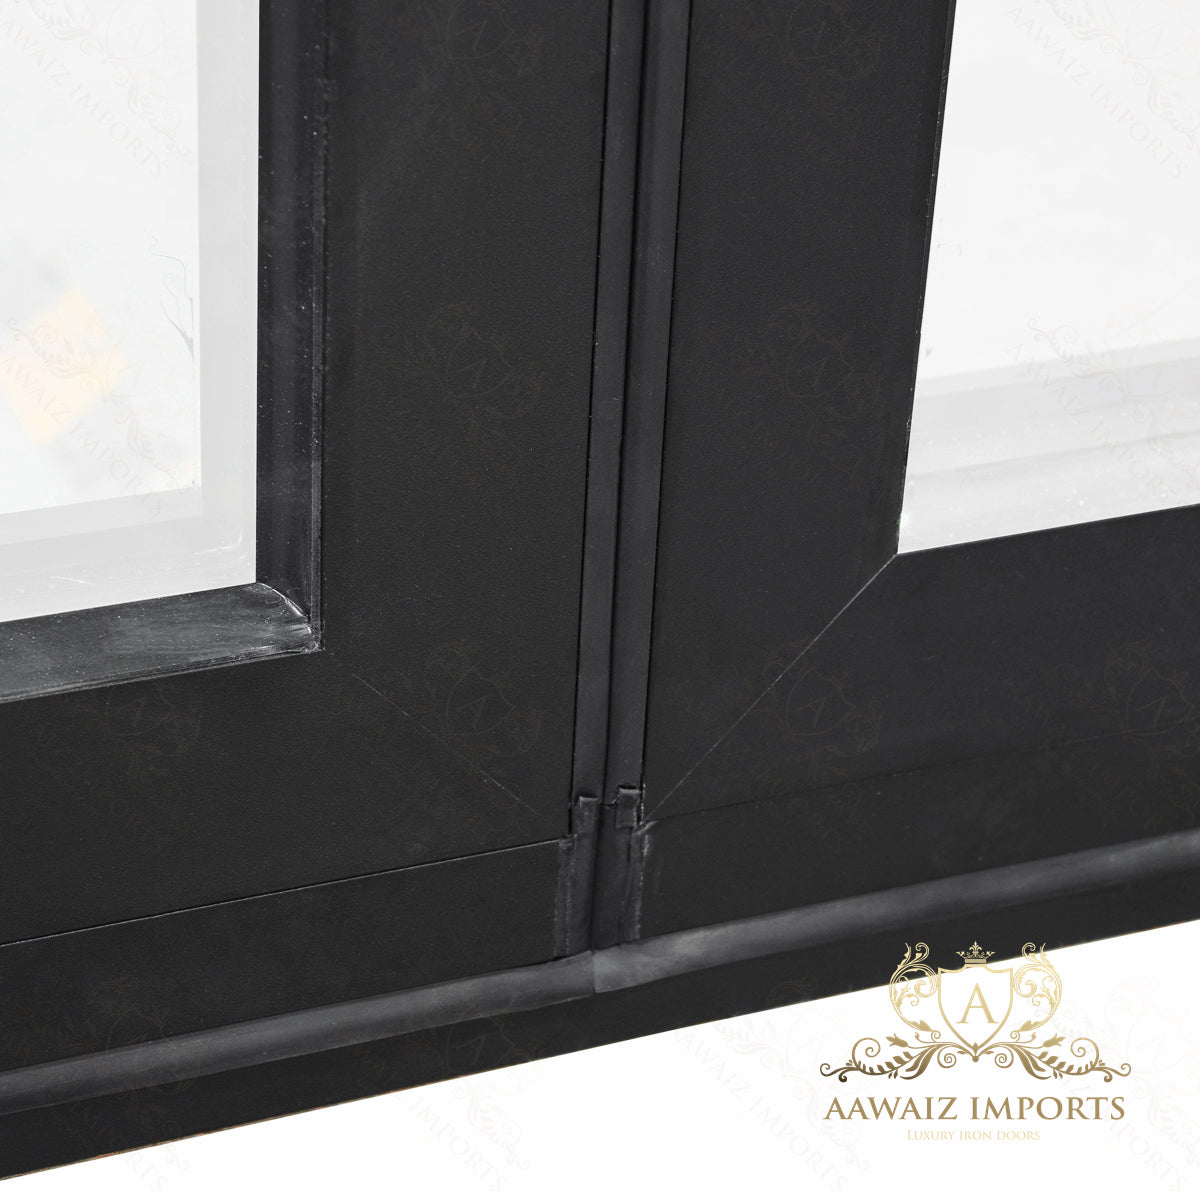 9 Ft Wide By 9 Ft Tall (108" By 108") Aluminum Bi Fold Patio Door Outswing Thermal Break Insulated Matt Black Finish